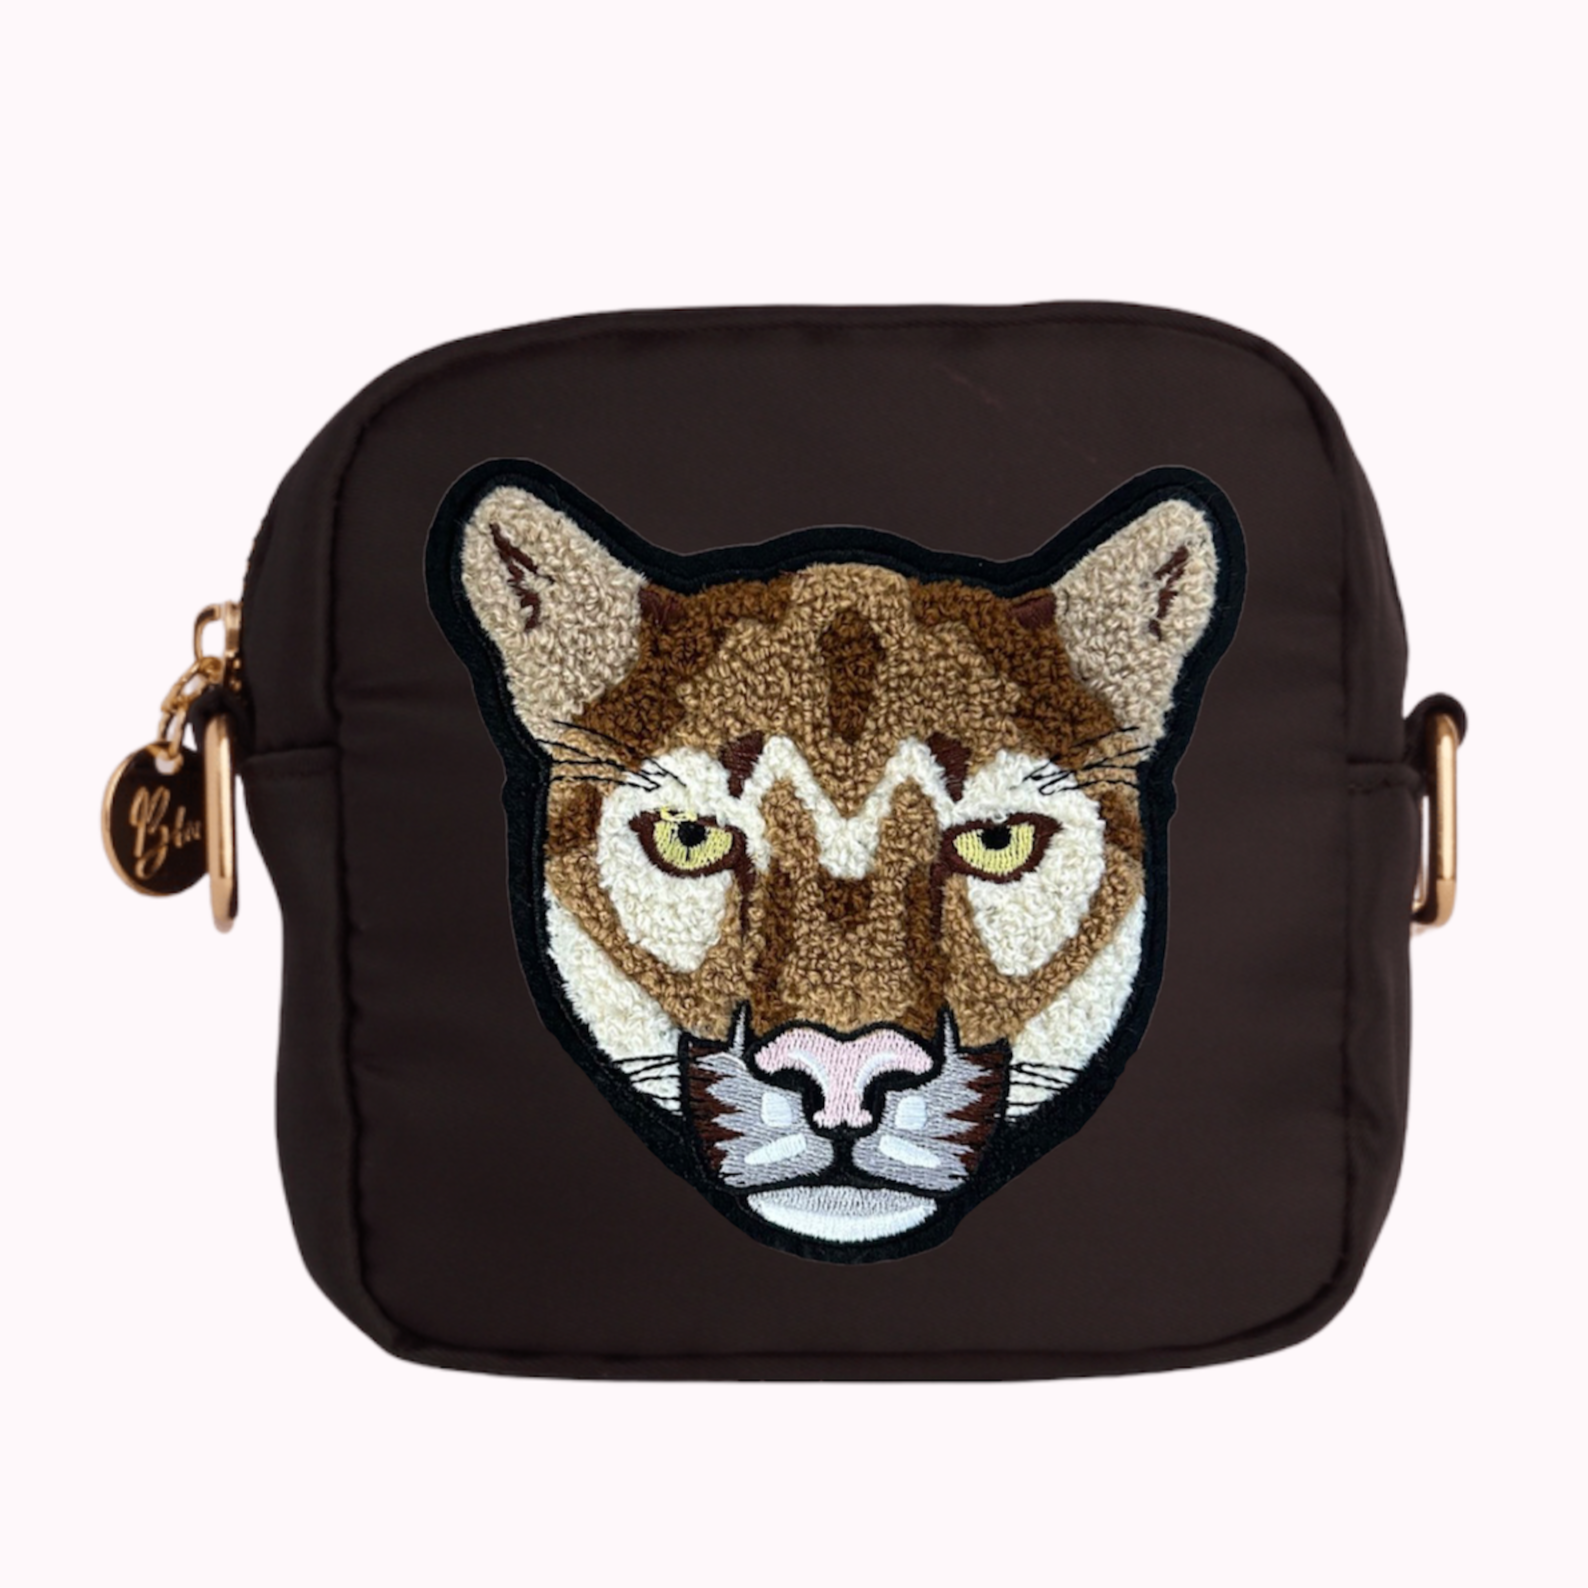 Black mini crossbody bag with cougar patch. 